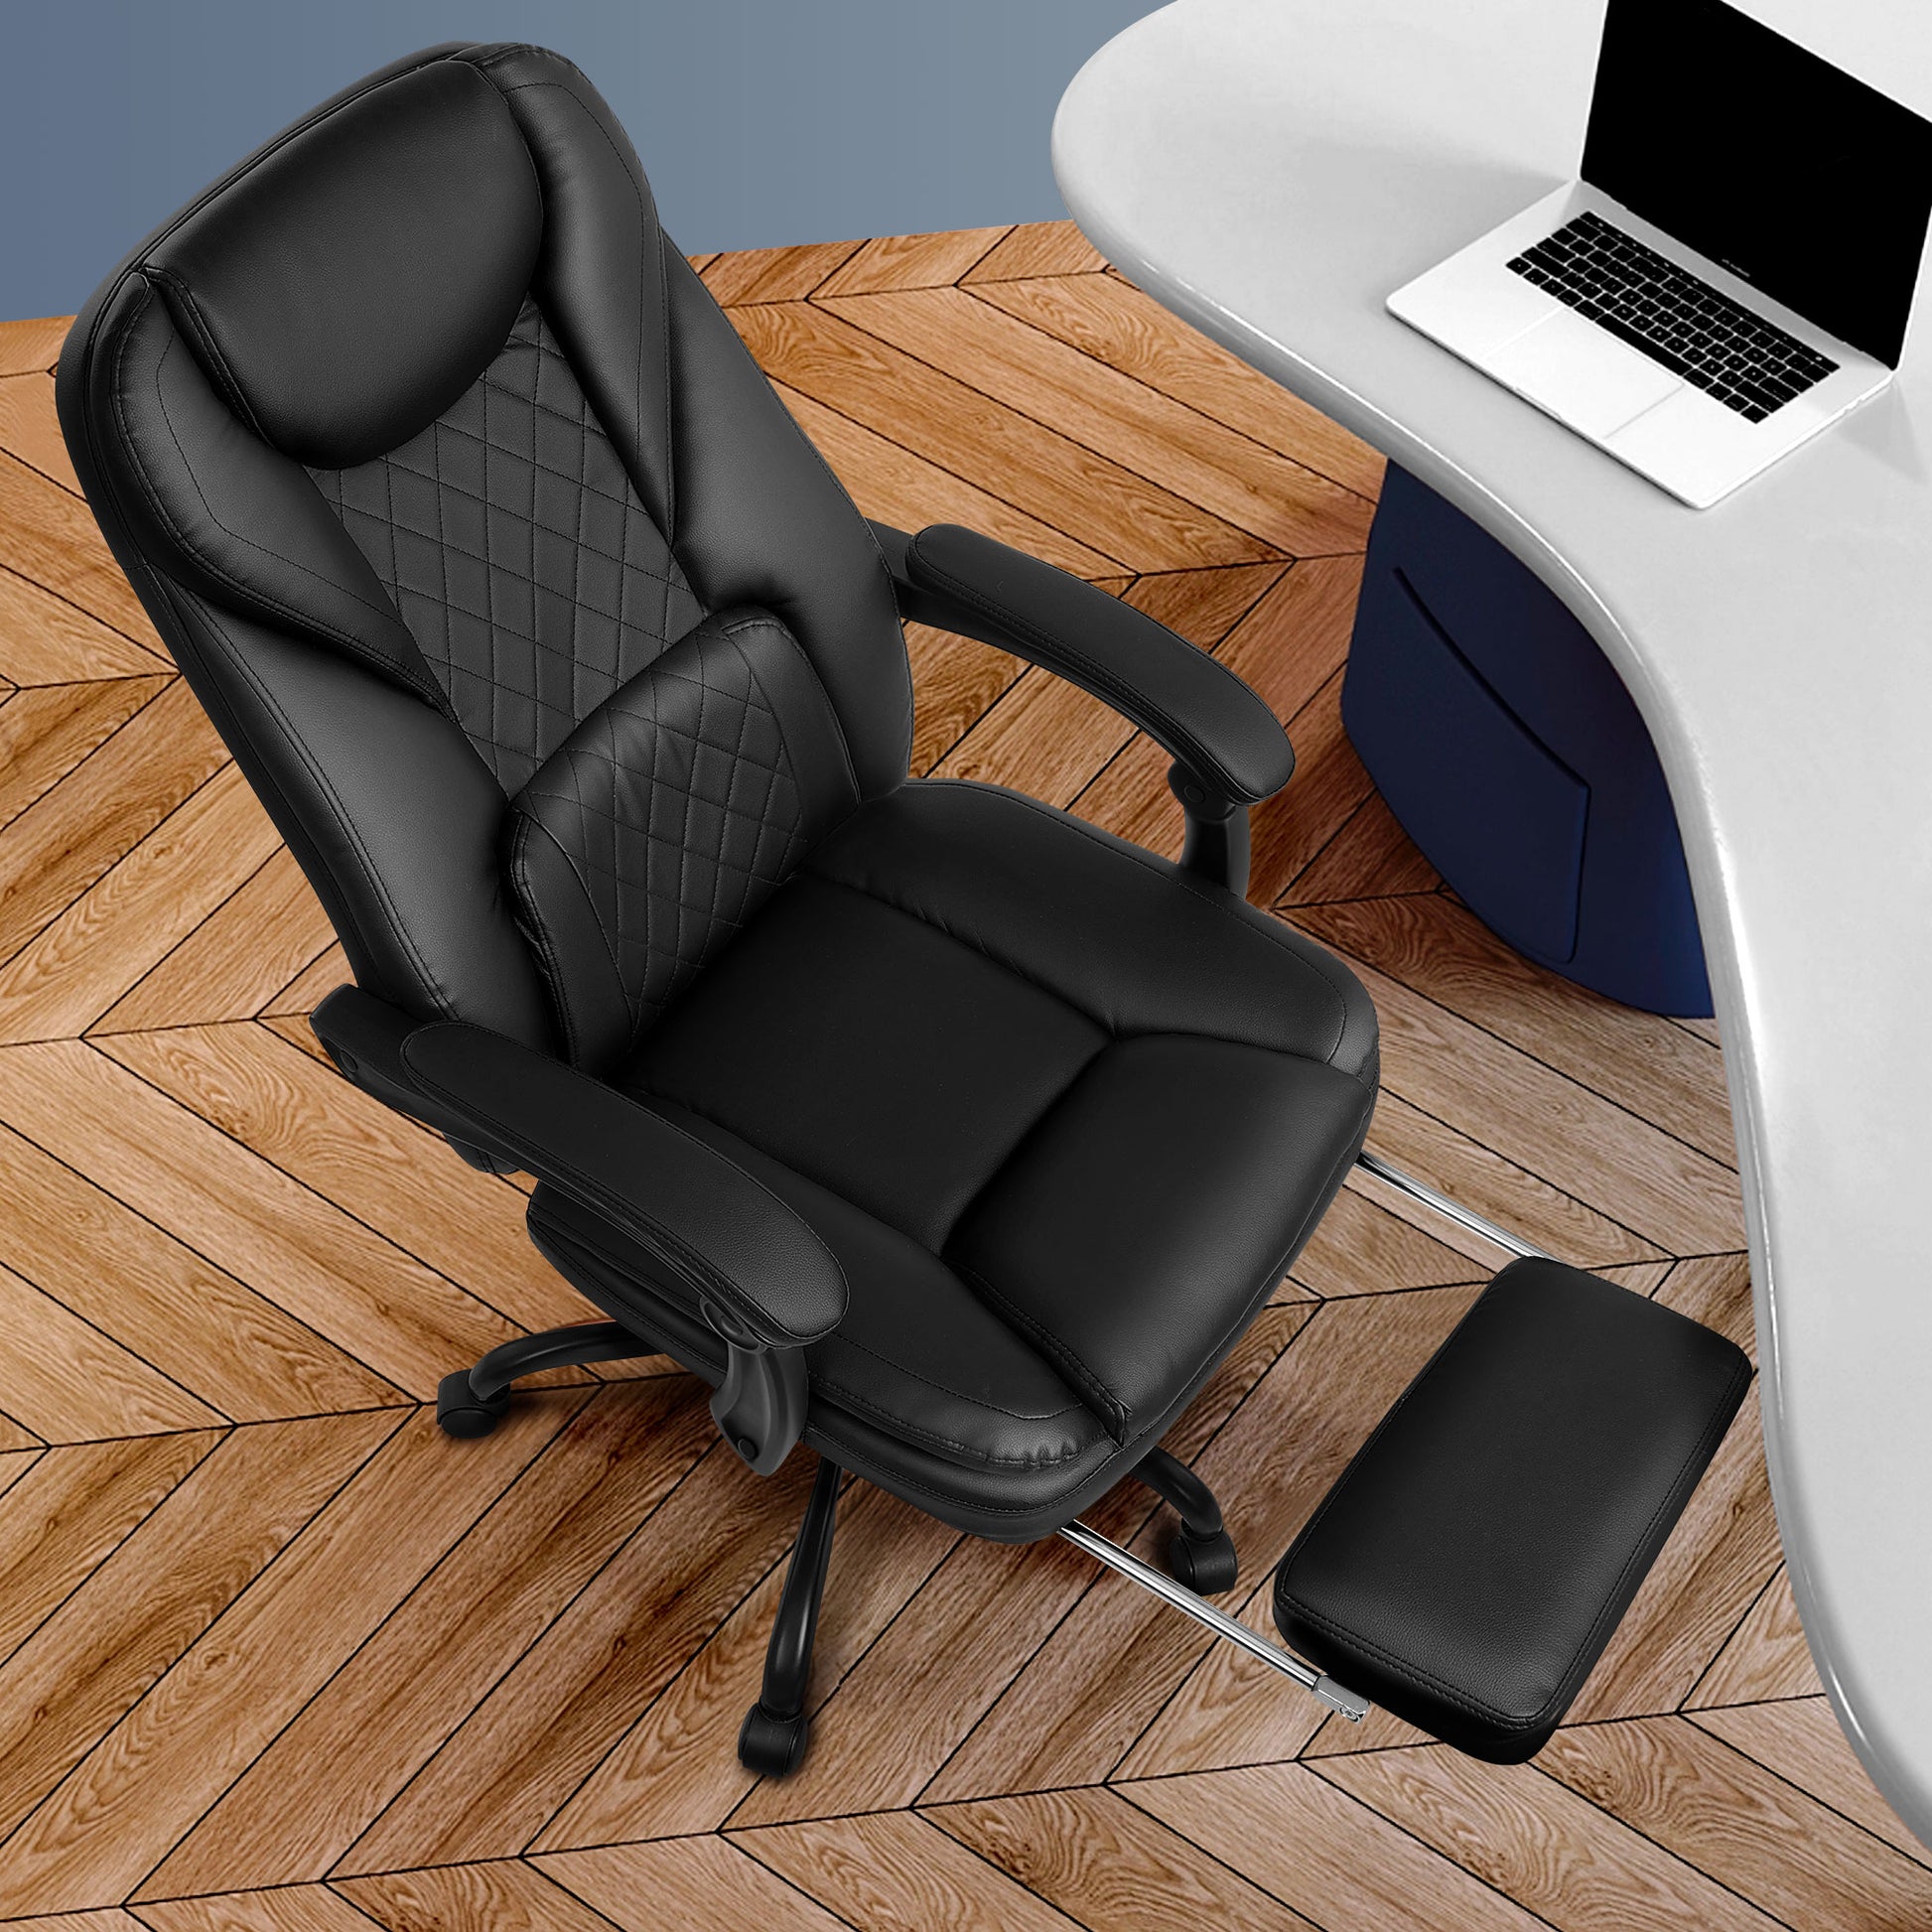 Big and Tall Executive Office Chair With Foot Rest SDA003